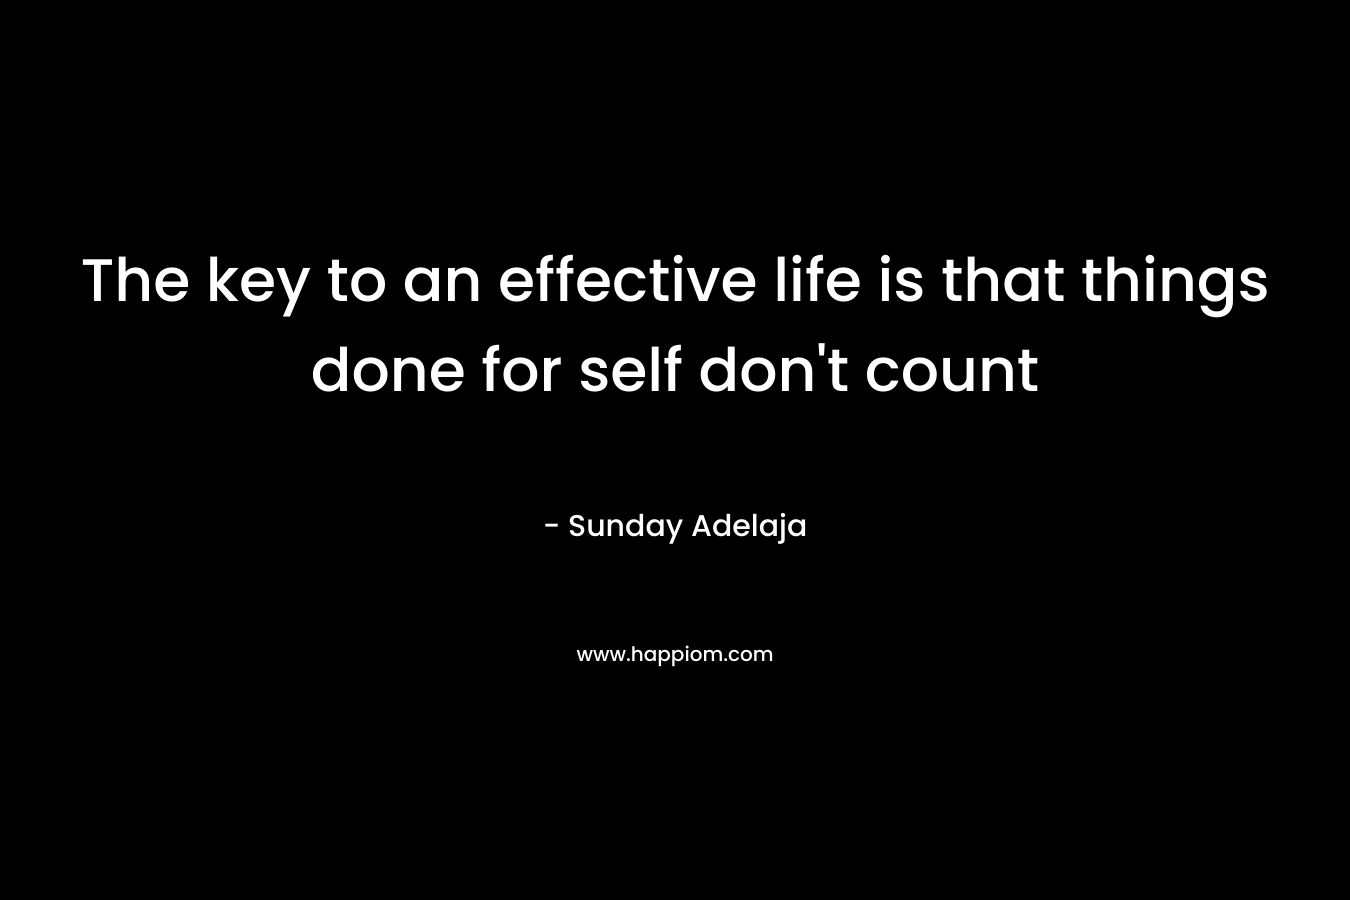 The key to an effective life is that things done for self don't count